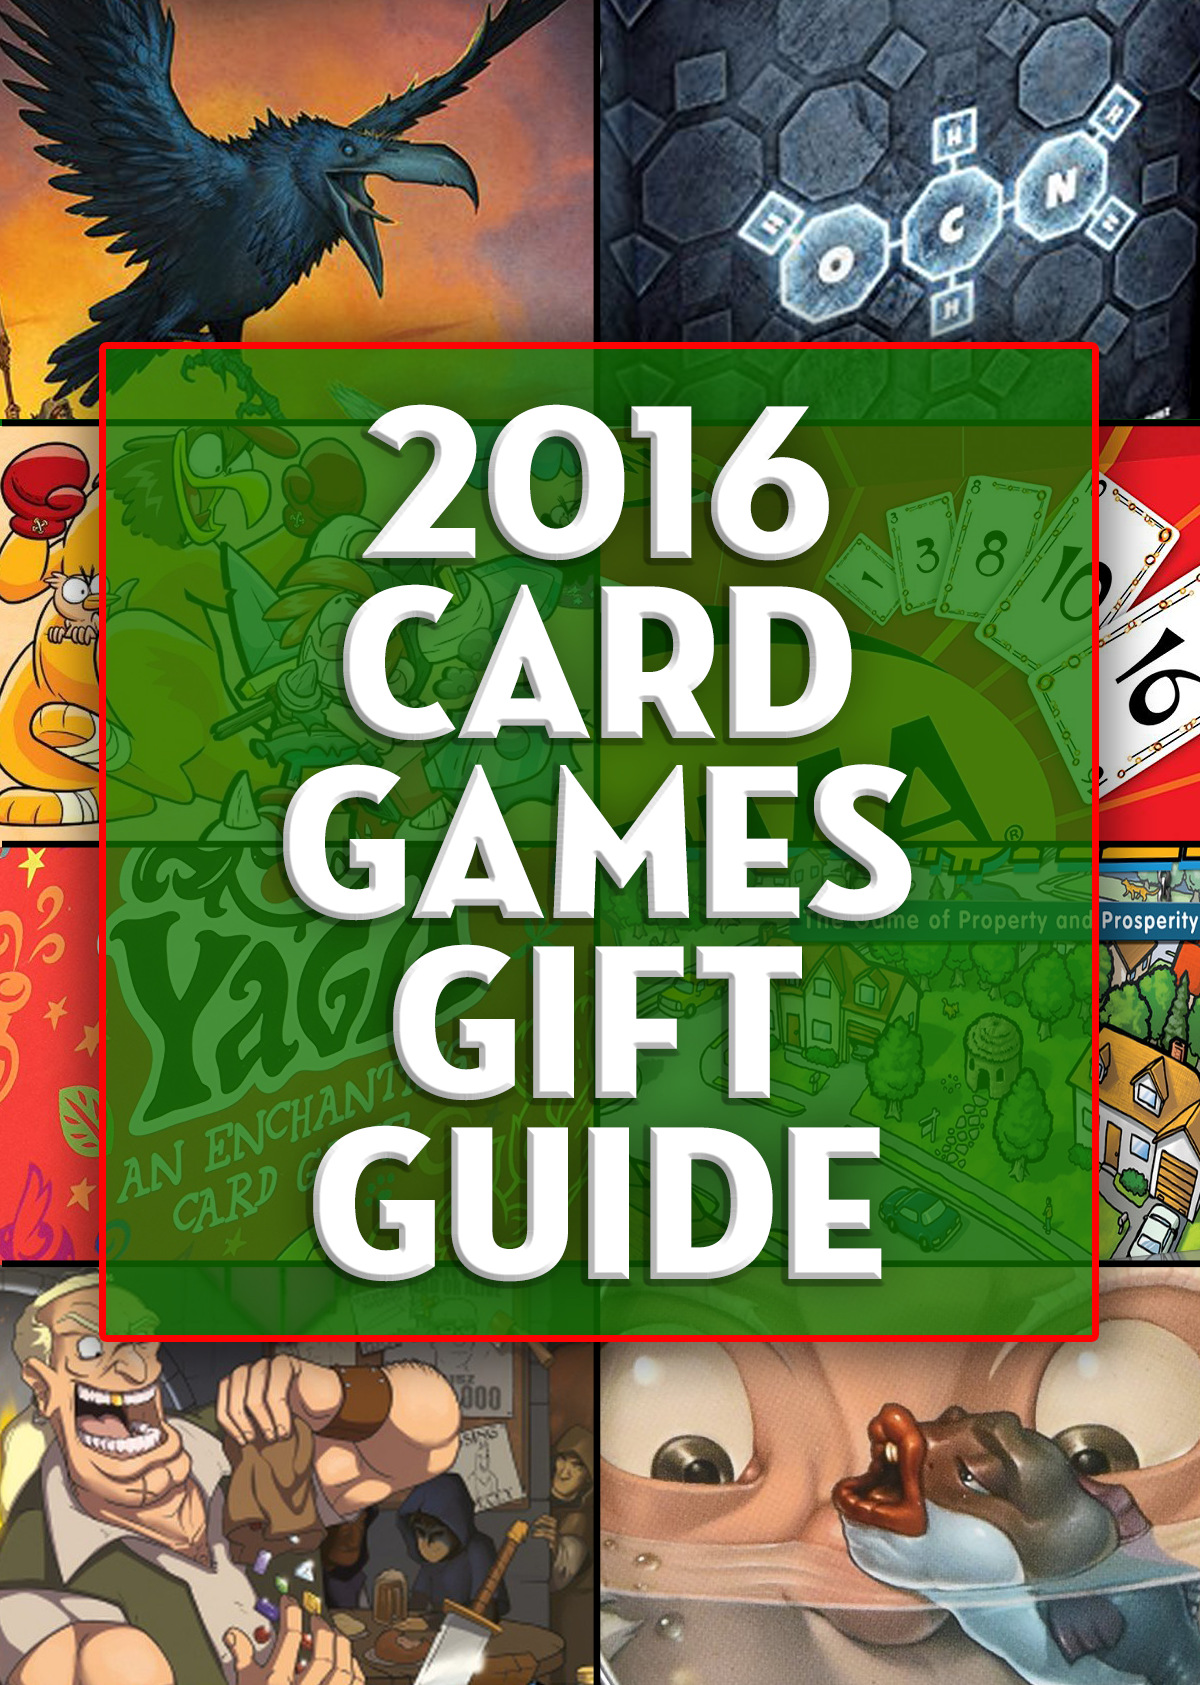 There aren't many things more fun than sitting down with family and playing a great card game. Here's a handful of ideas in our annual Gift Guide! - SahmReviews.com